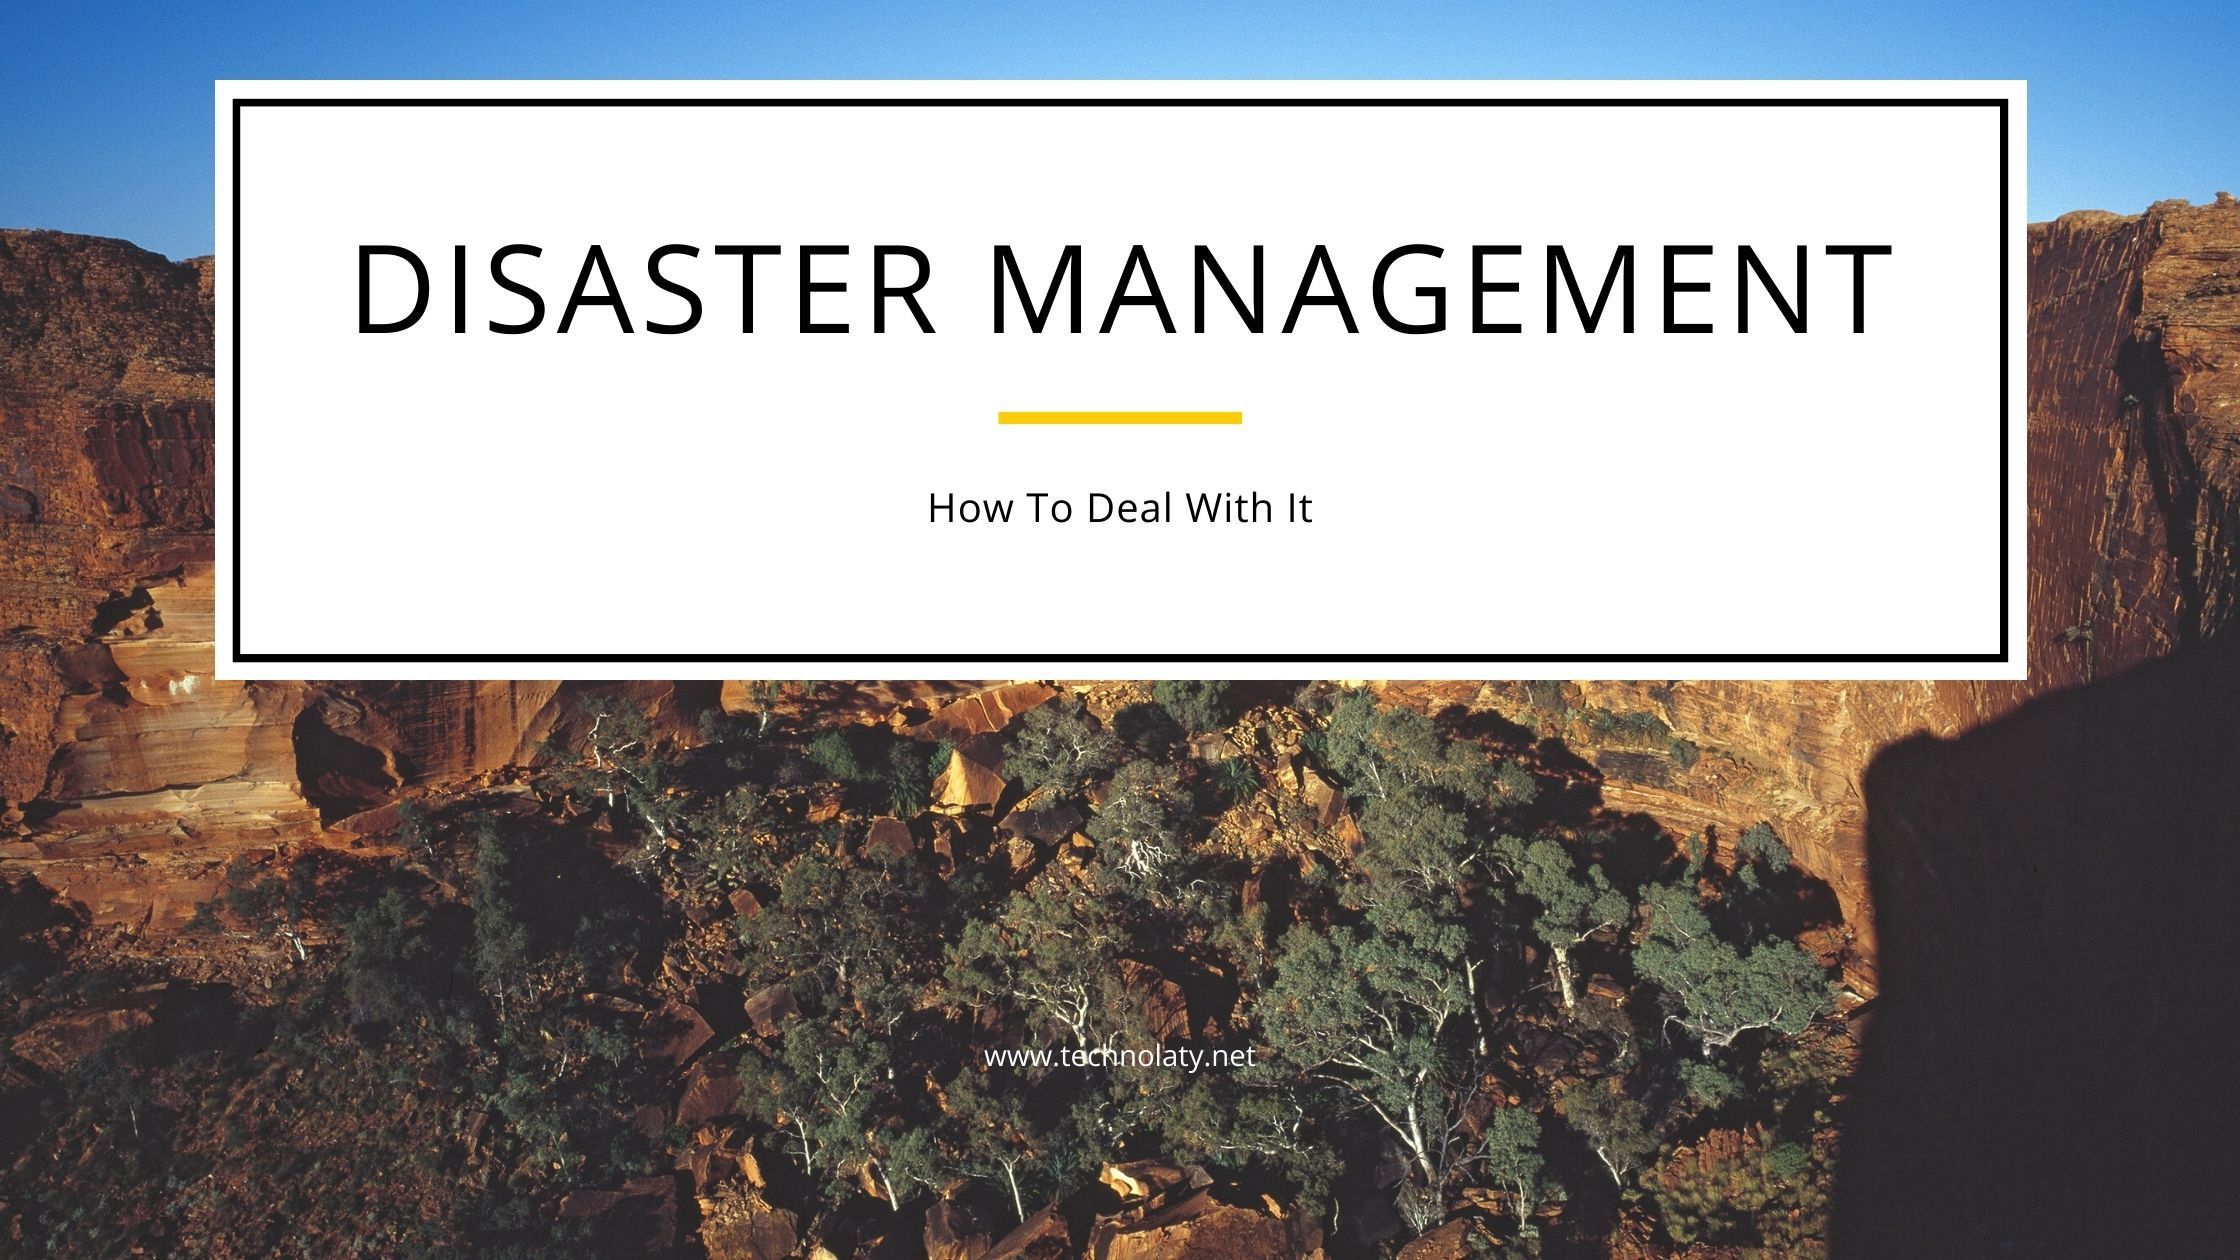 How To Deal With Disaster